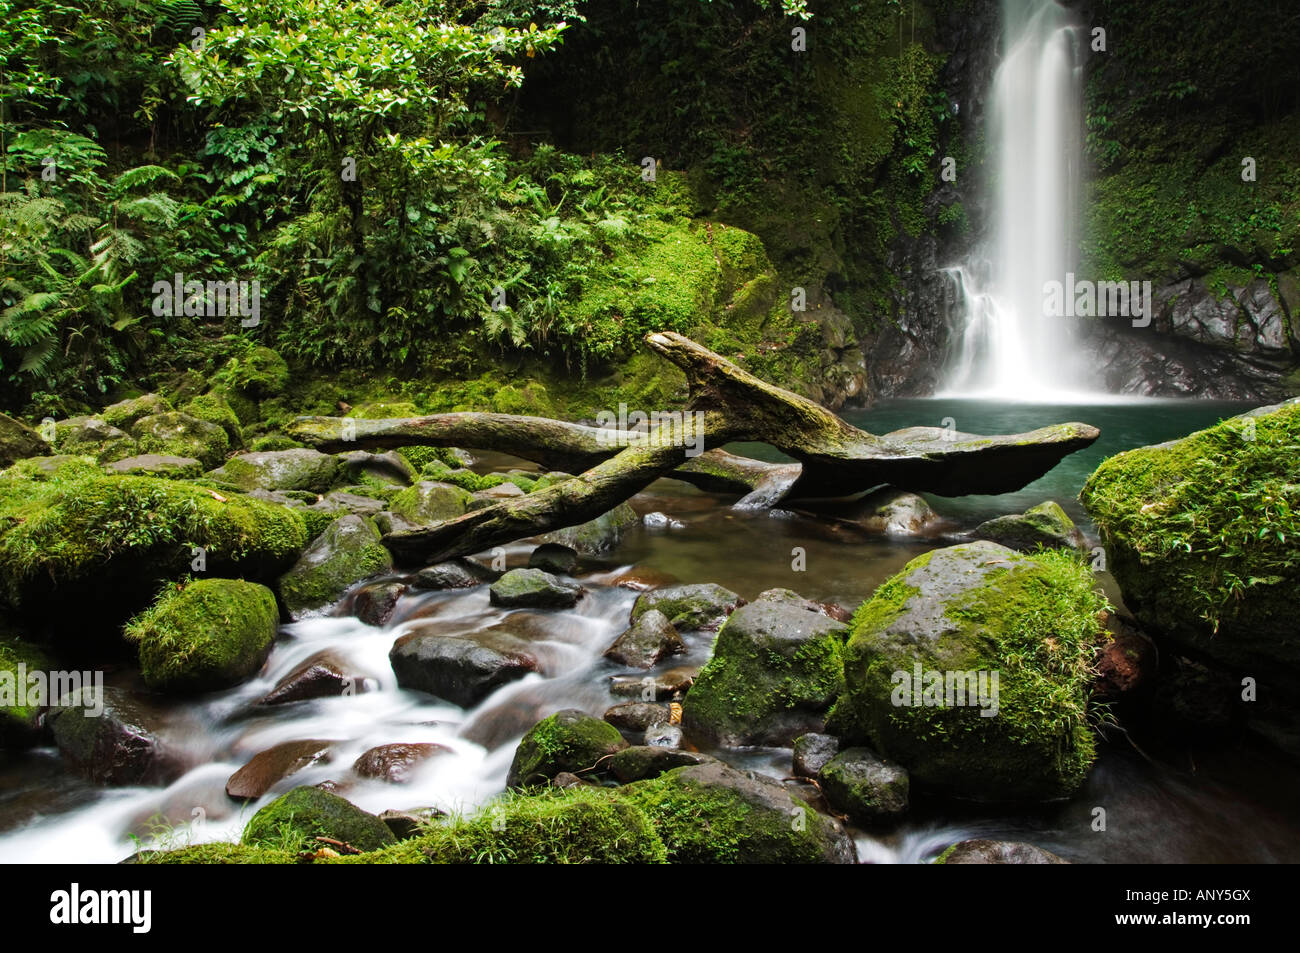 Philippines, South East Luzon, Bicol Province. Mount Isarog National Park - Malabsay Waterfall. Stock Photo